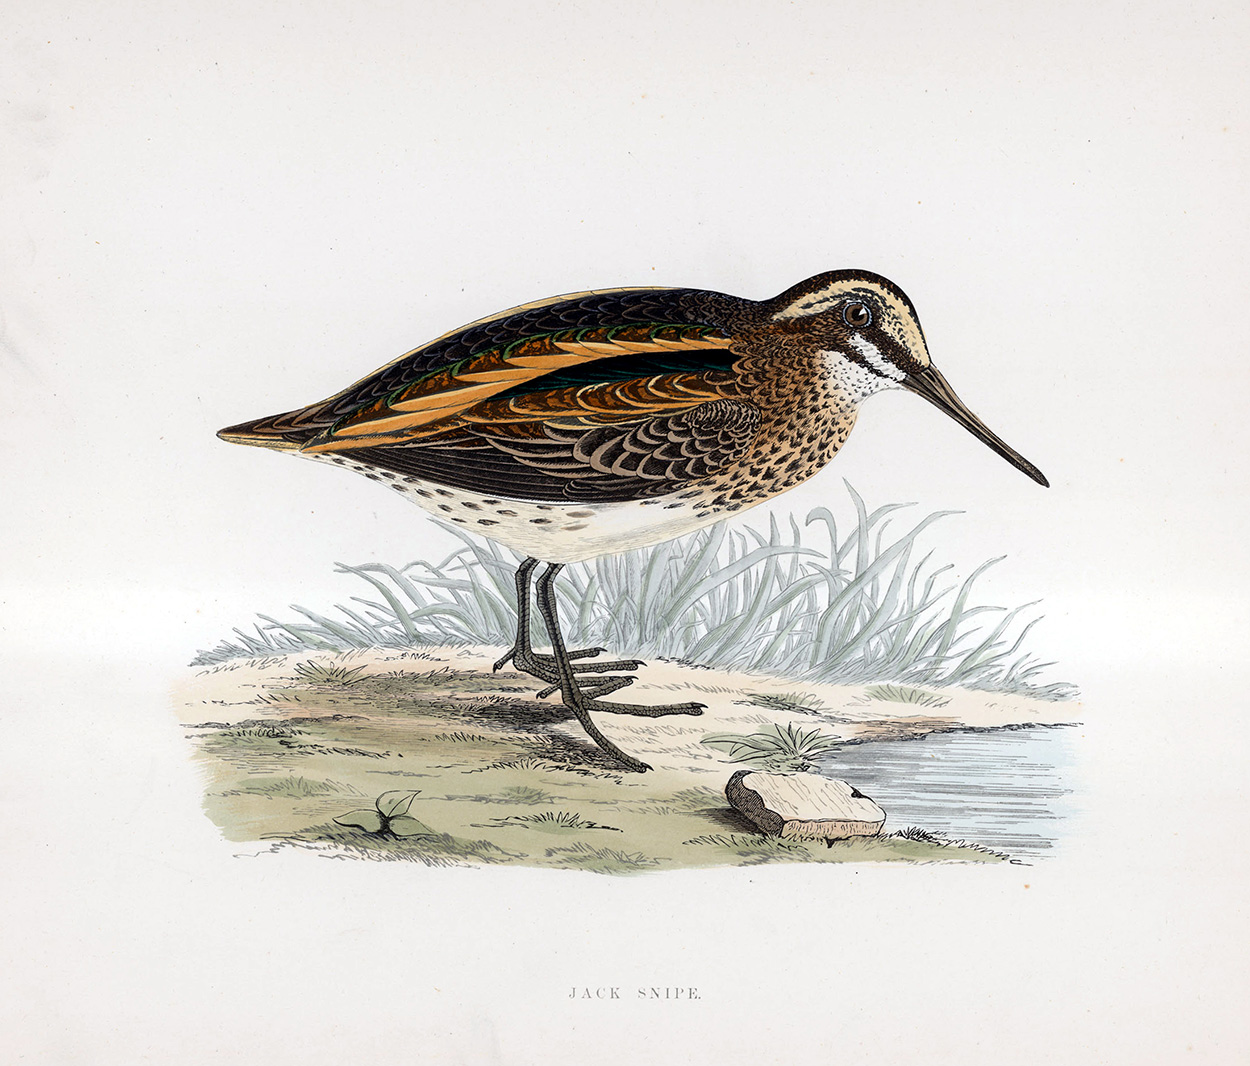 Jack Snipe - hand coloured lithograph 1891 (Print) art by Beverley R Morris Art at The Illustration Art Gallery